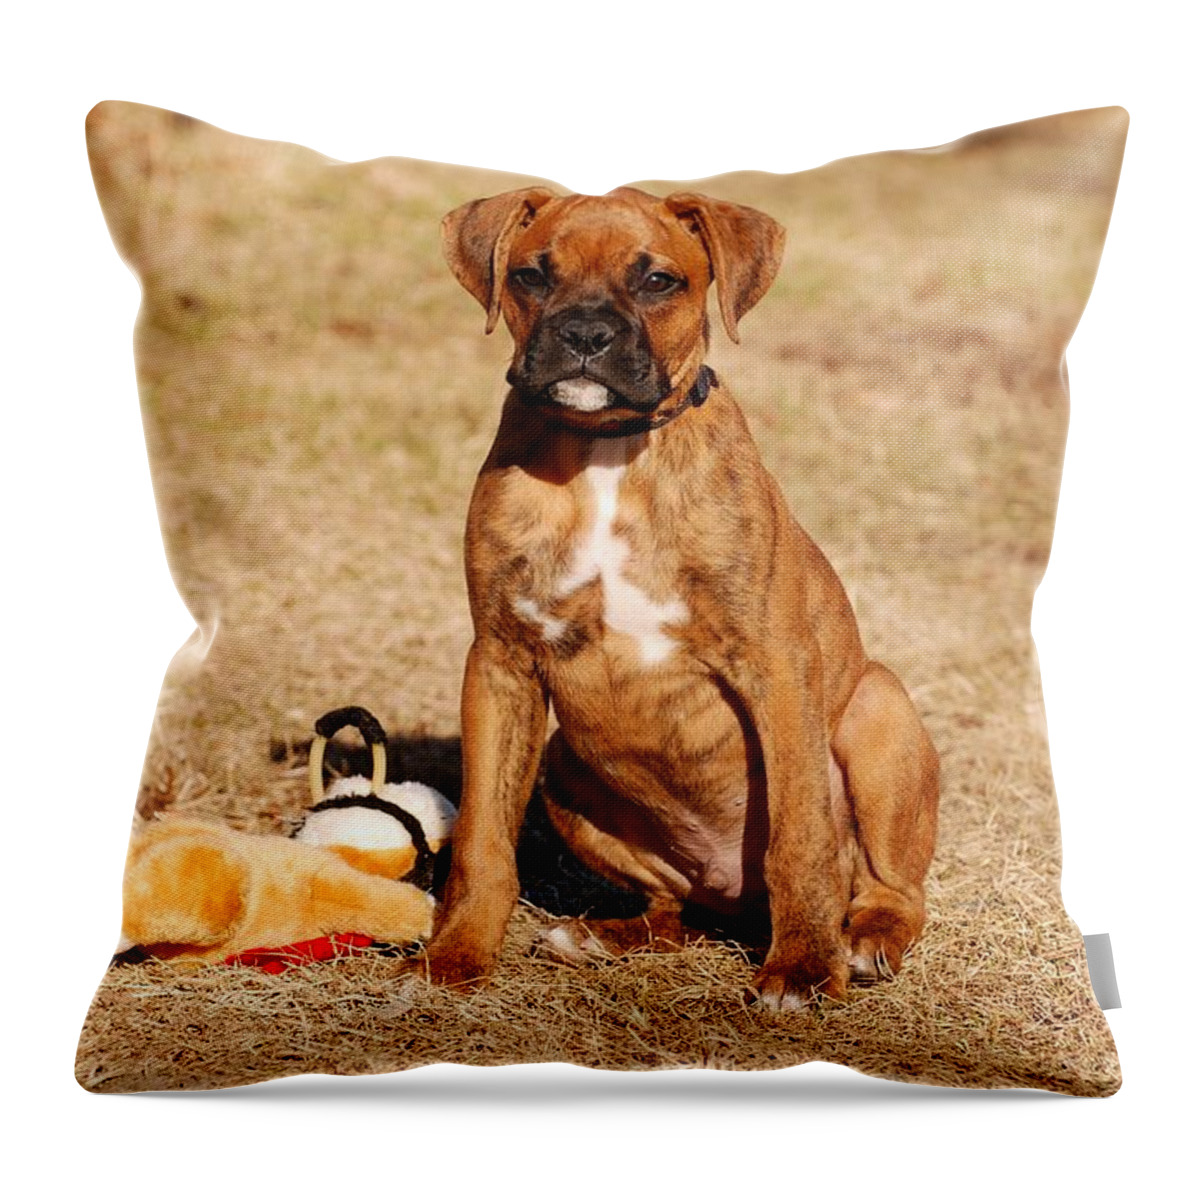 Boxer Puppy Throw Pillow featuring the photograph Bailey The Boxer Puppy by Angie Tirado